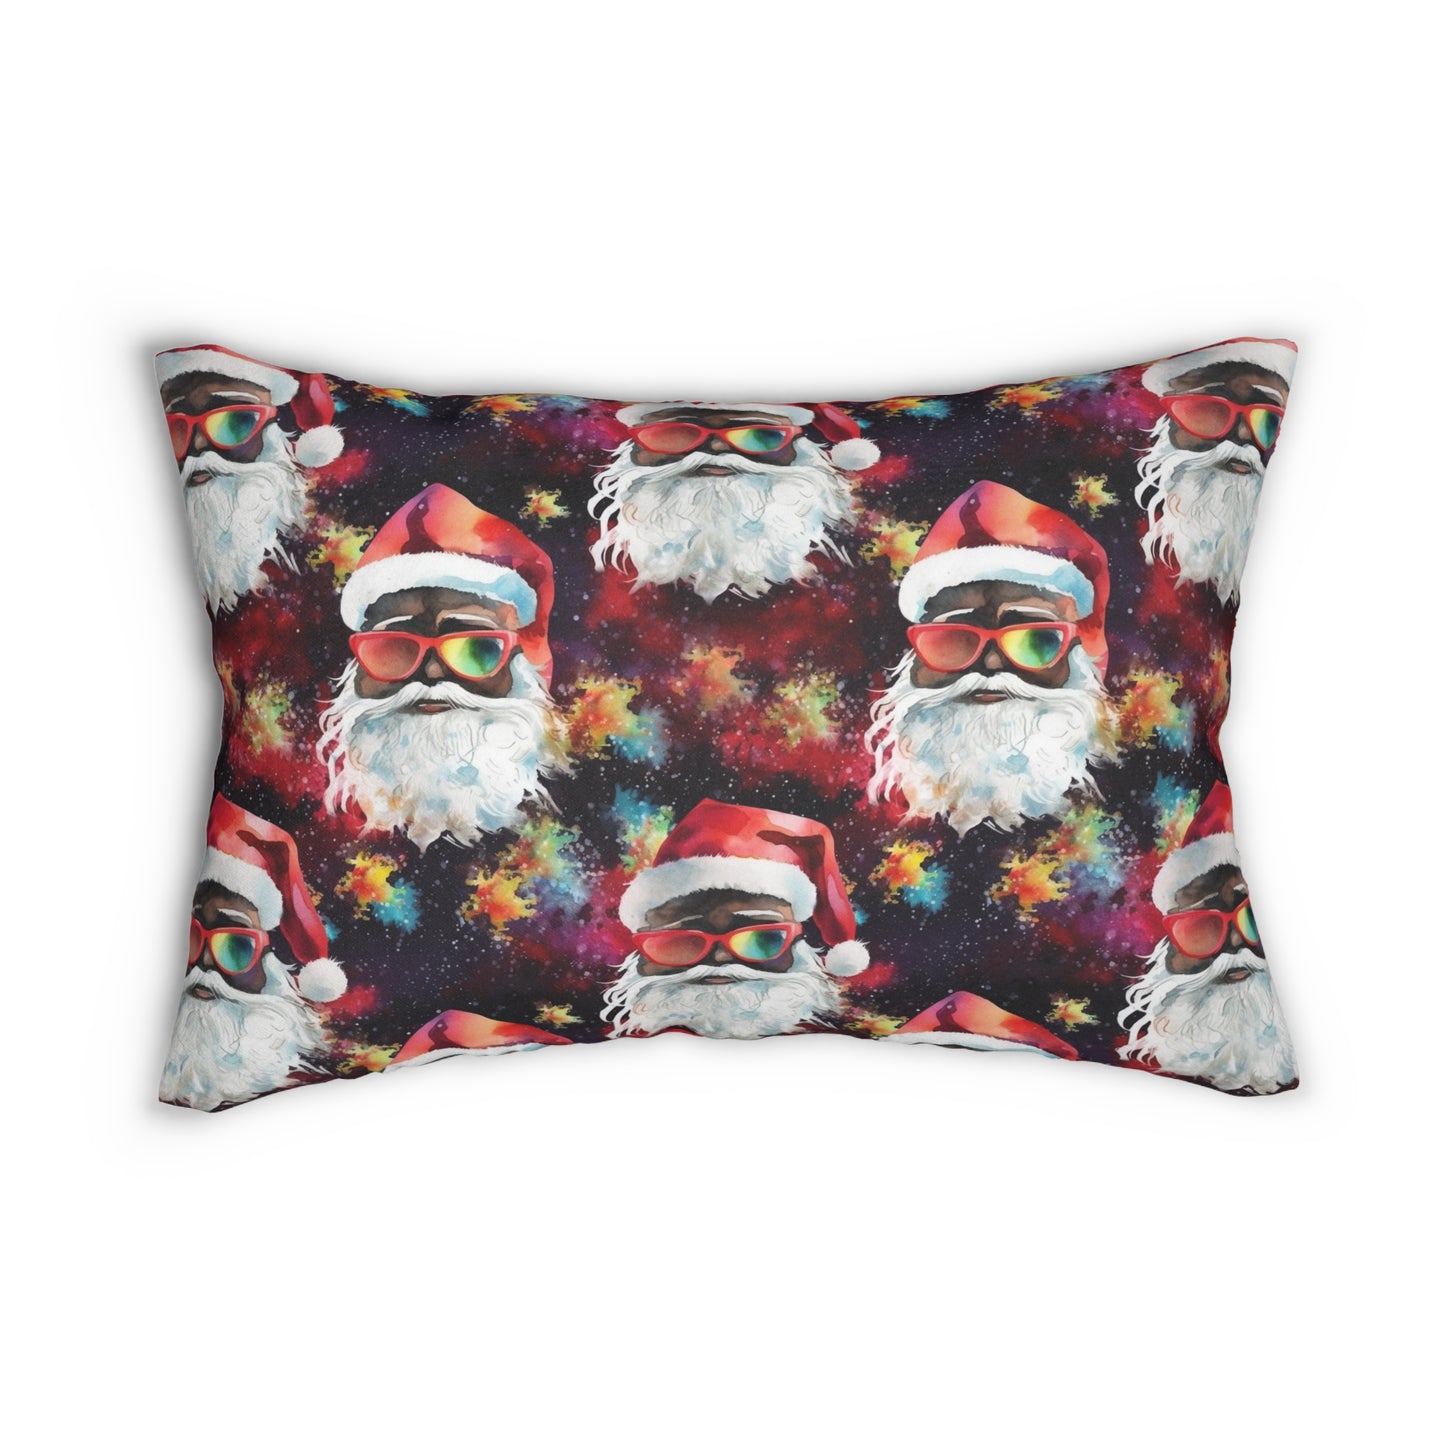 Black Santa Lumbar Pillow, Cool Cute Christmas Couch Holiday Pillow Cover